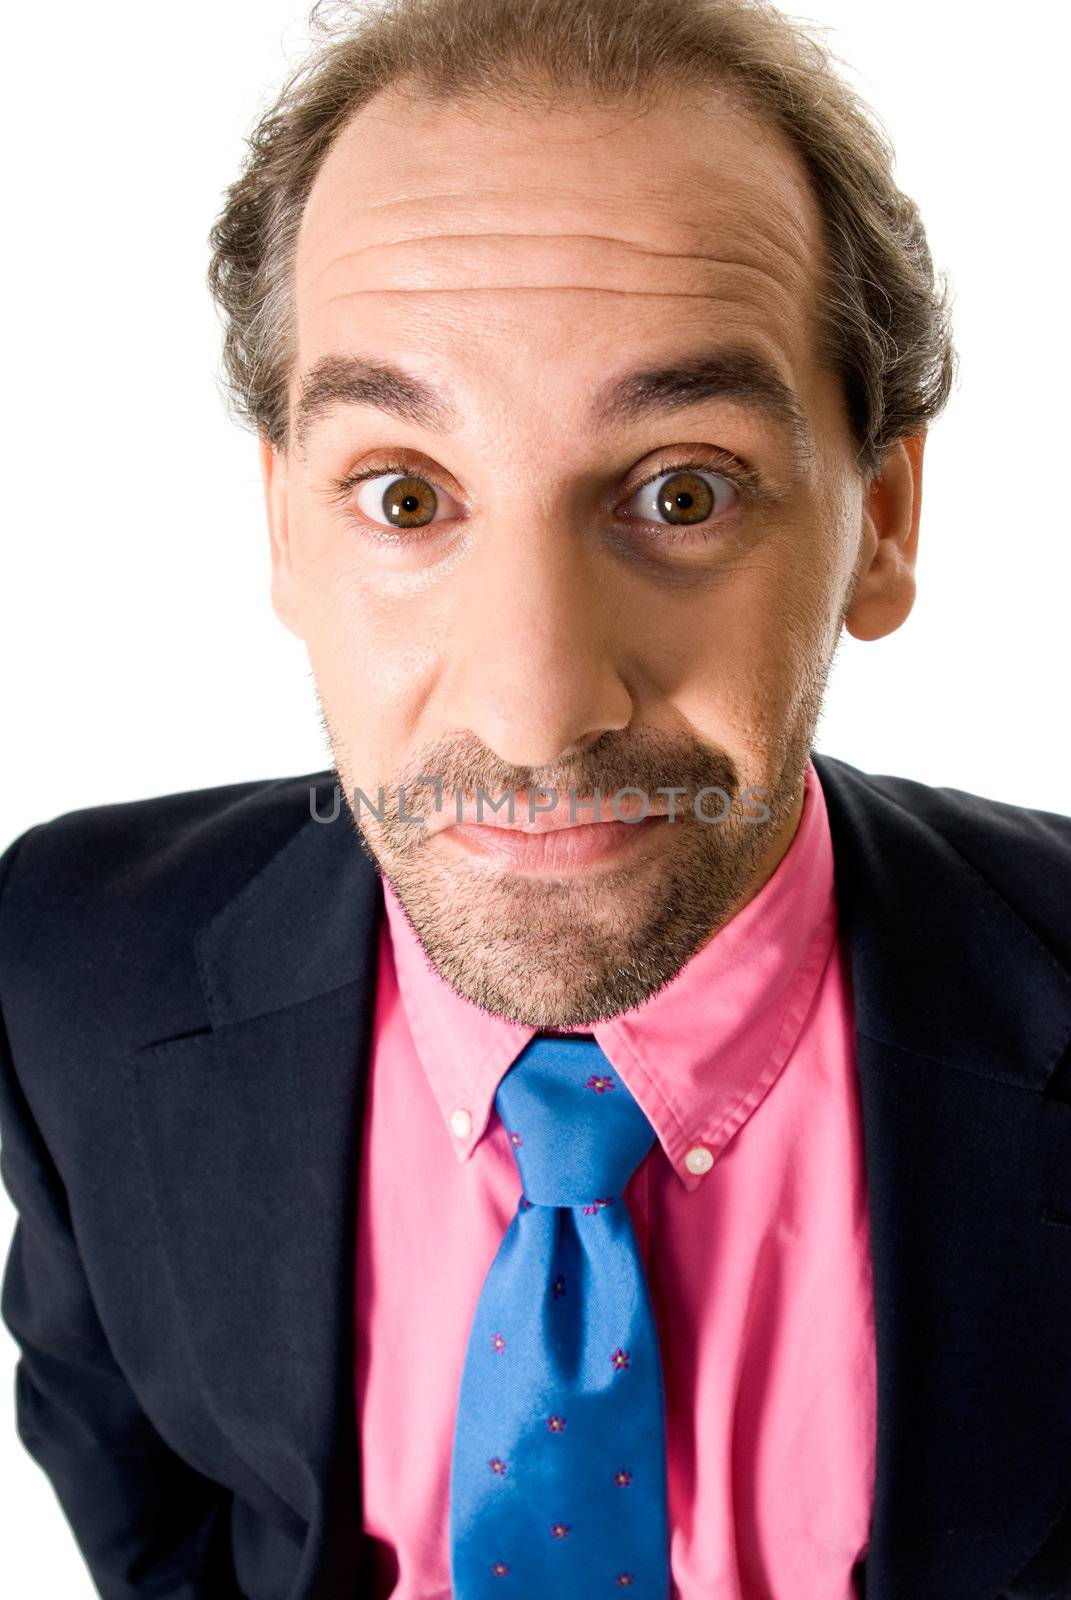 Cheerful businessman with surprise expression on white background.